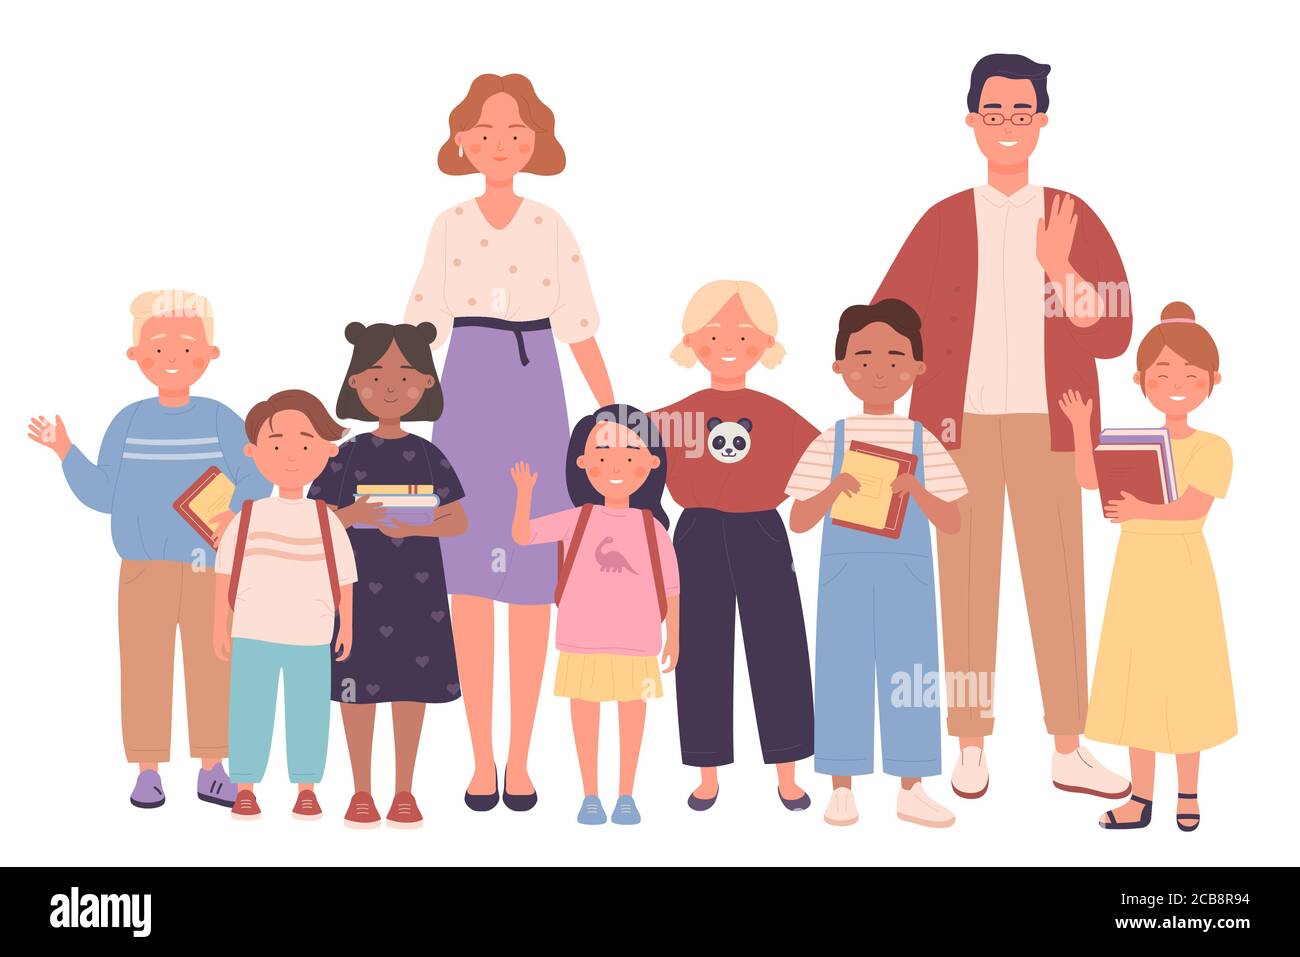 Teachers and kids vector illustration. Pedagogues and pupils, smiling people, adults and schoolchildren flat characters. Study group, class photo, educators with children, learners and teaching staff Stock Vector